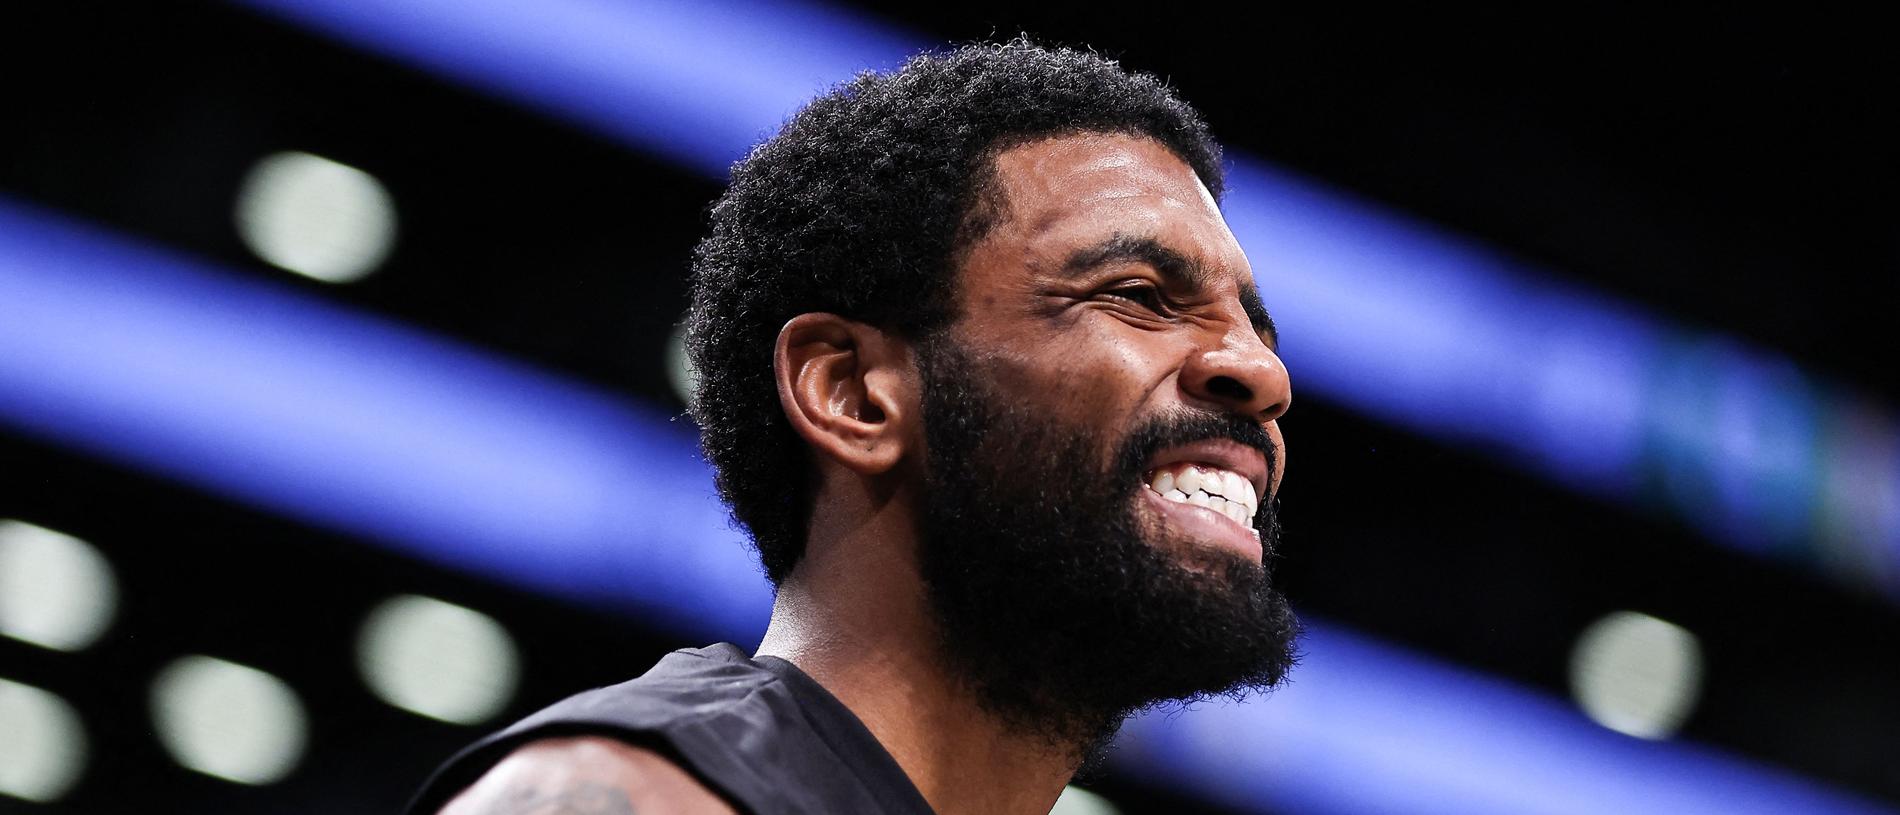 Kyrie Irving is back, and the Nets' charade becomes clear